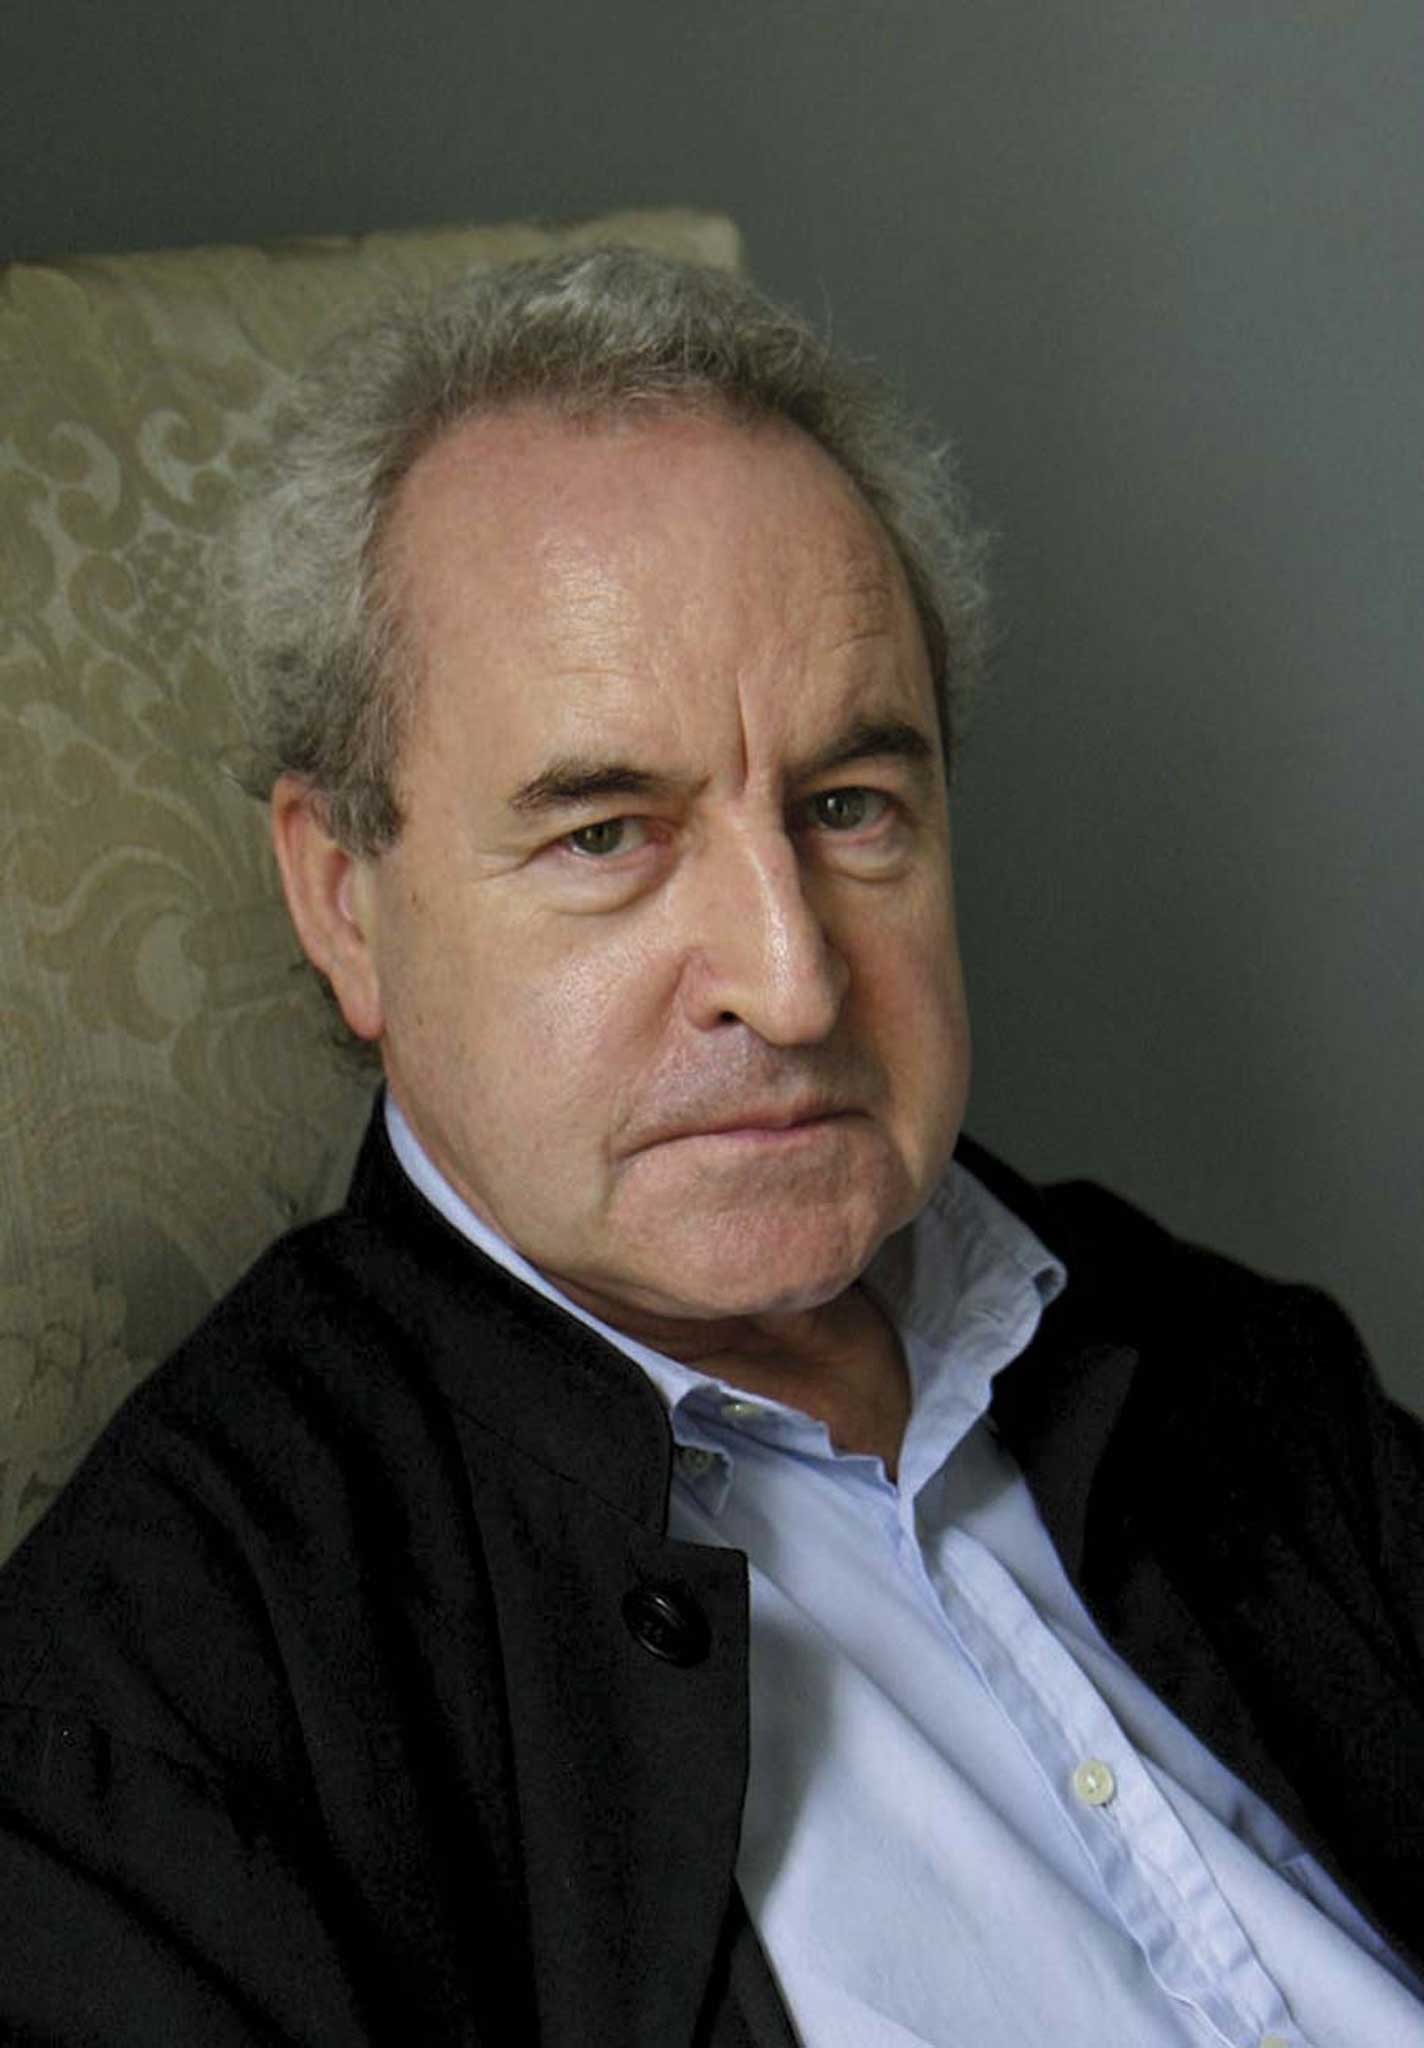 Banville says: 'There are not many good days, in my line of work.'